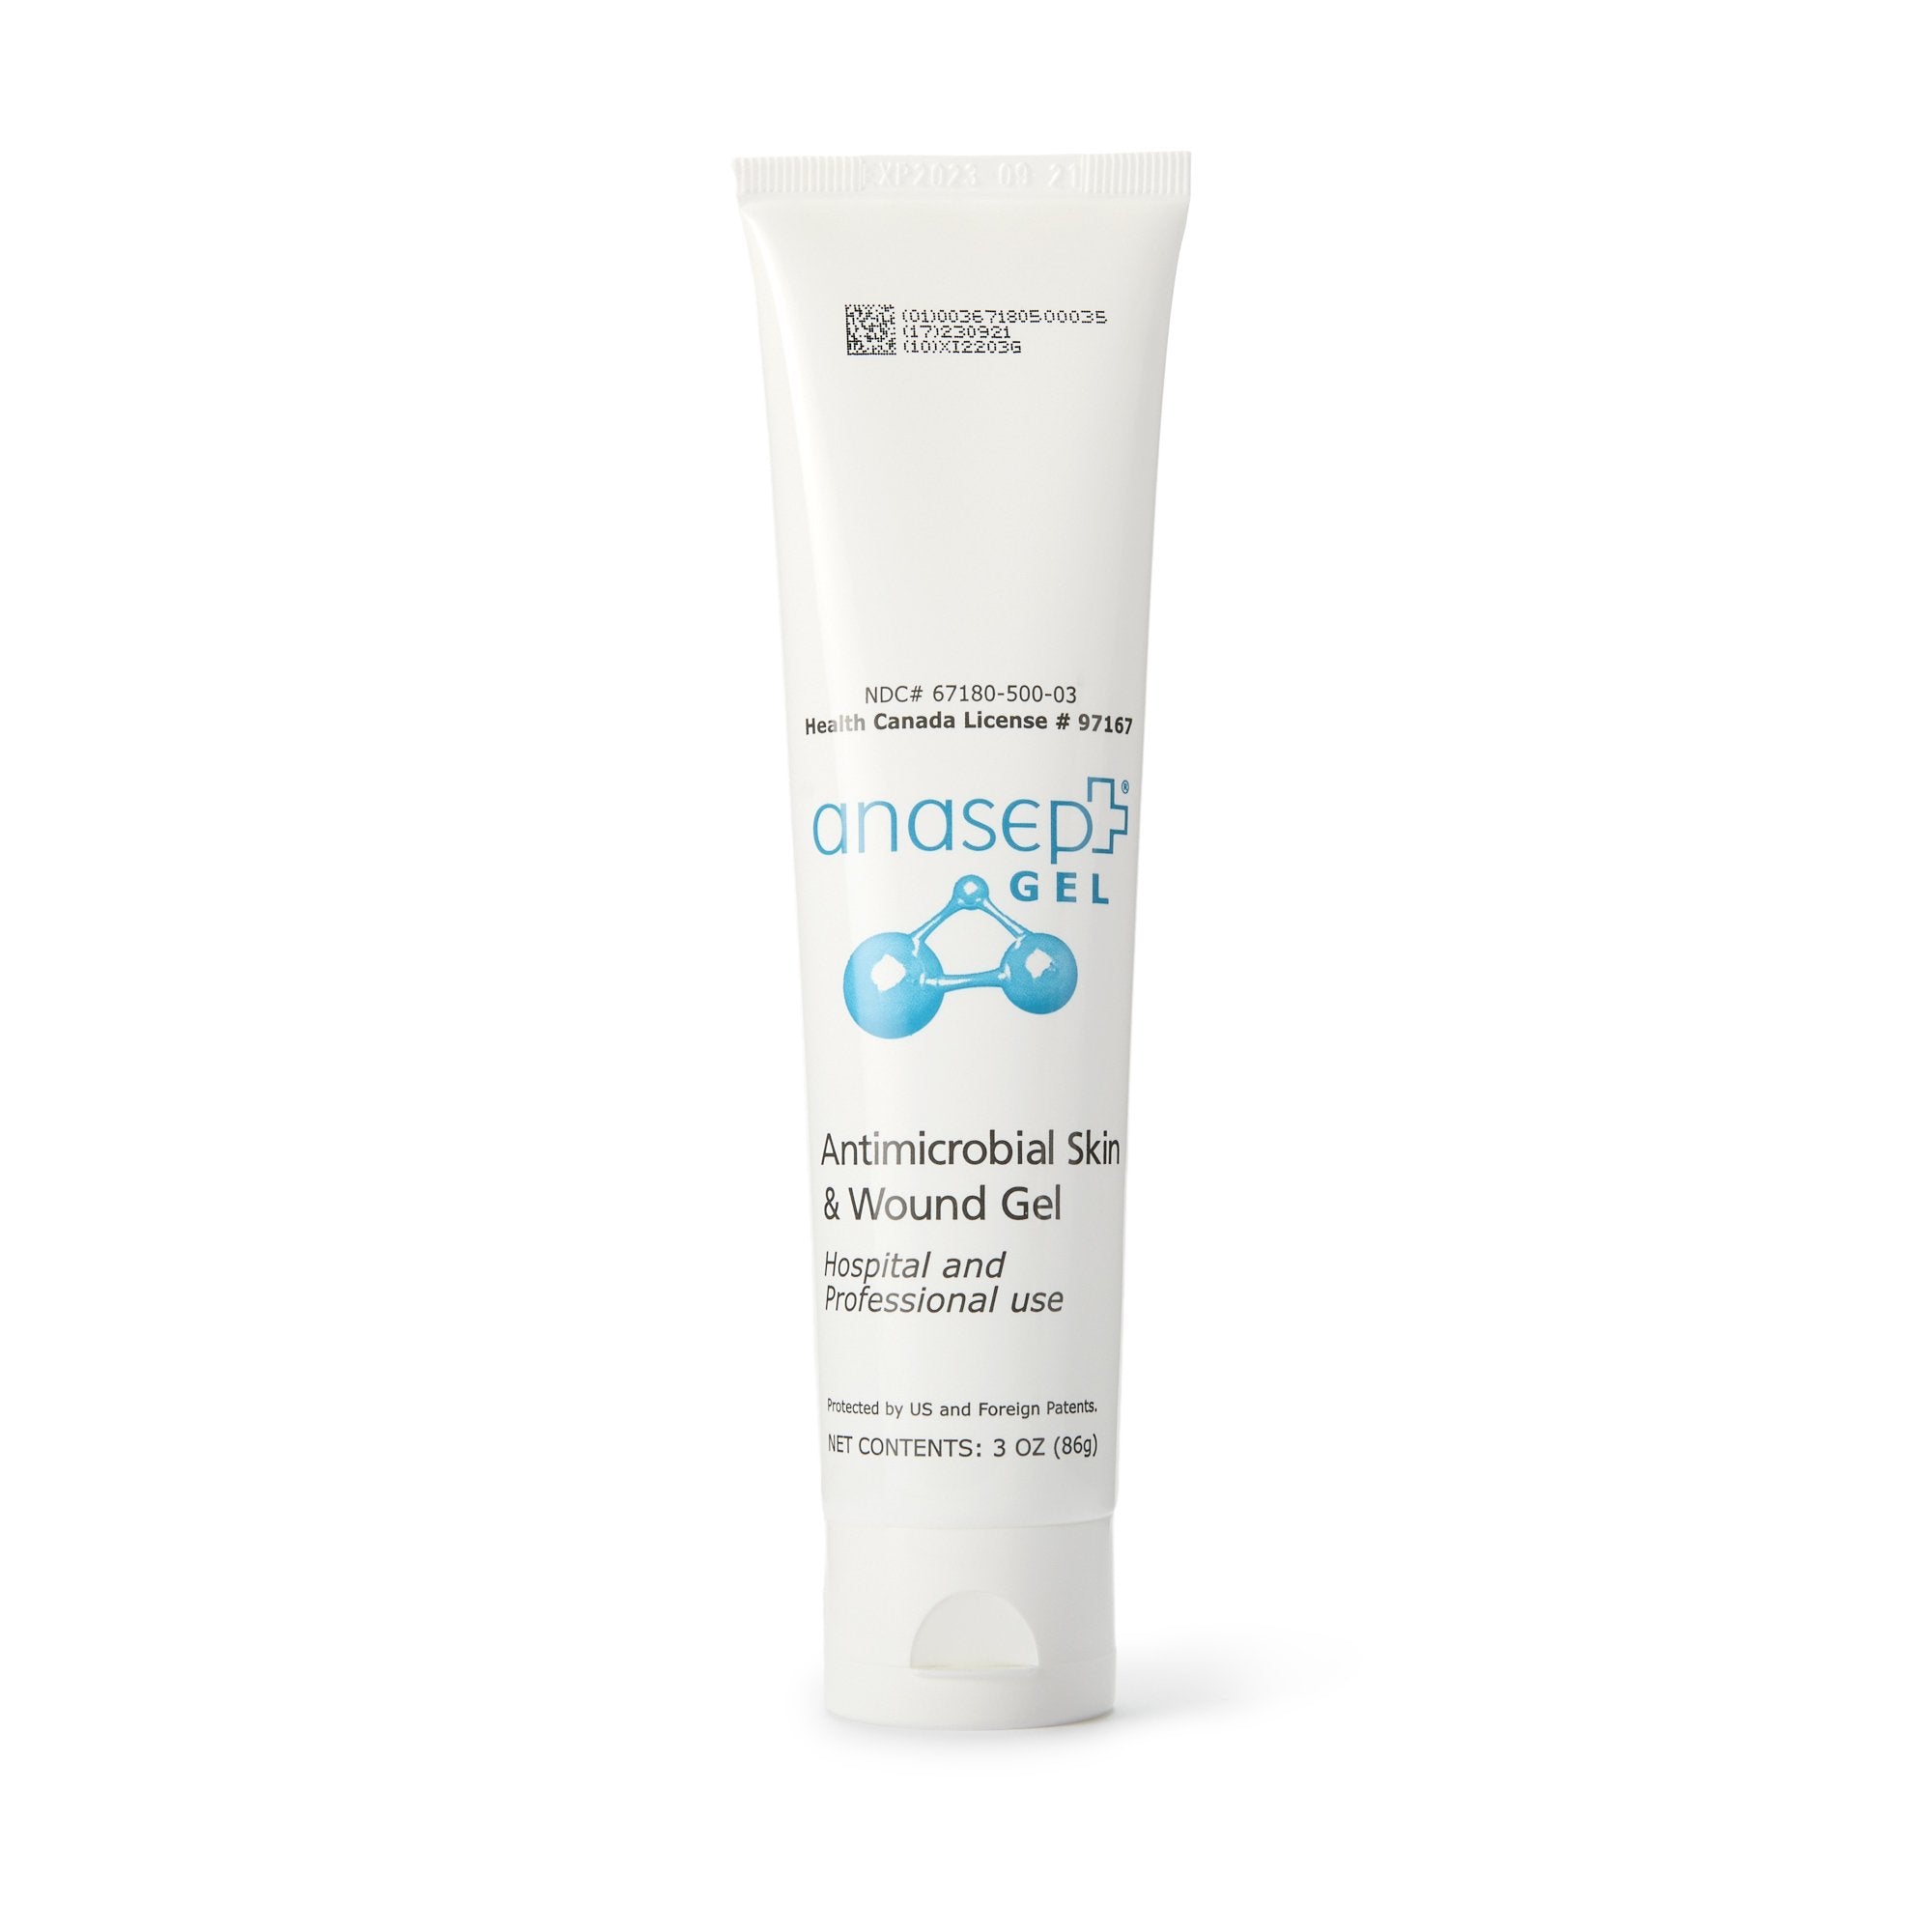 Antimicrobial Hydrogel Anasept® Antimicrobial Skin and Wound Gel 3 oz. Gel / Amorphous Gel / Amorphous NonSterile